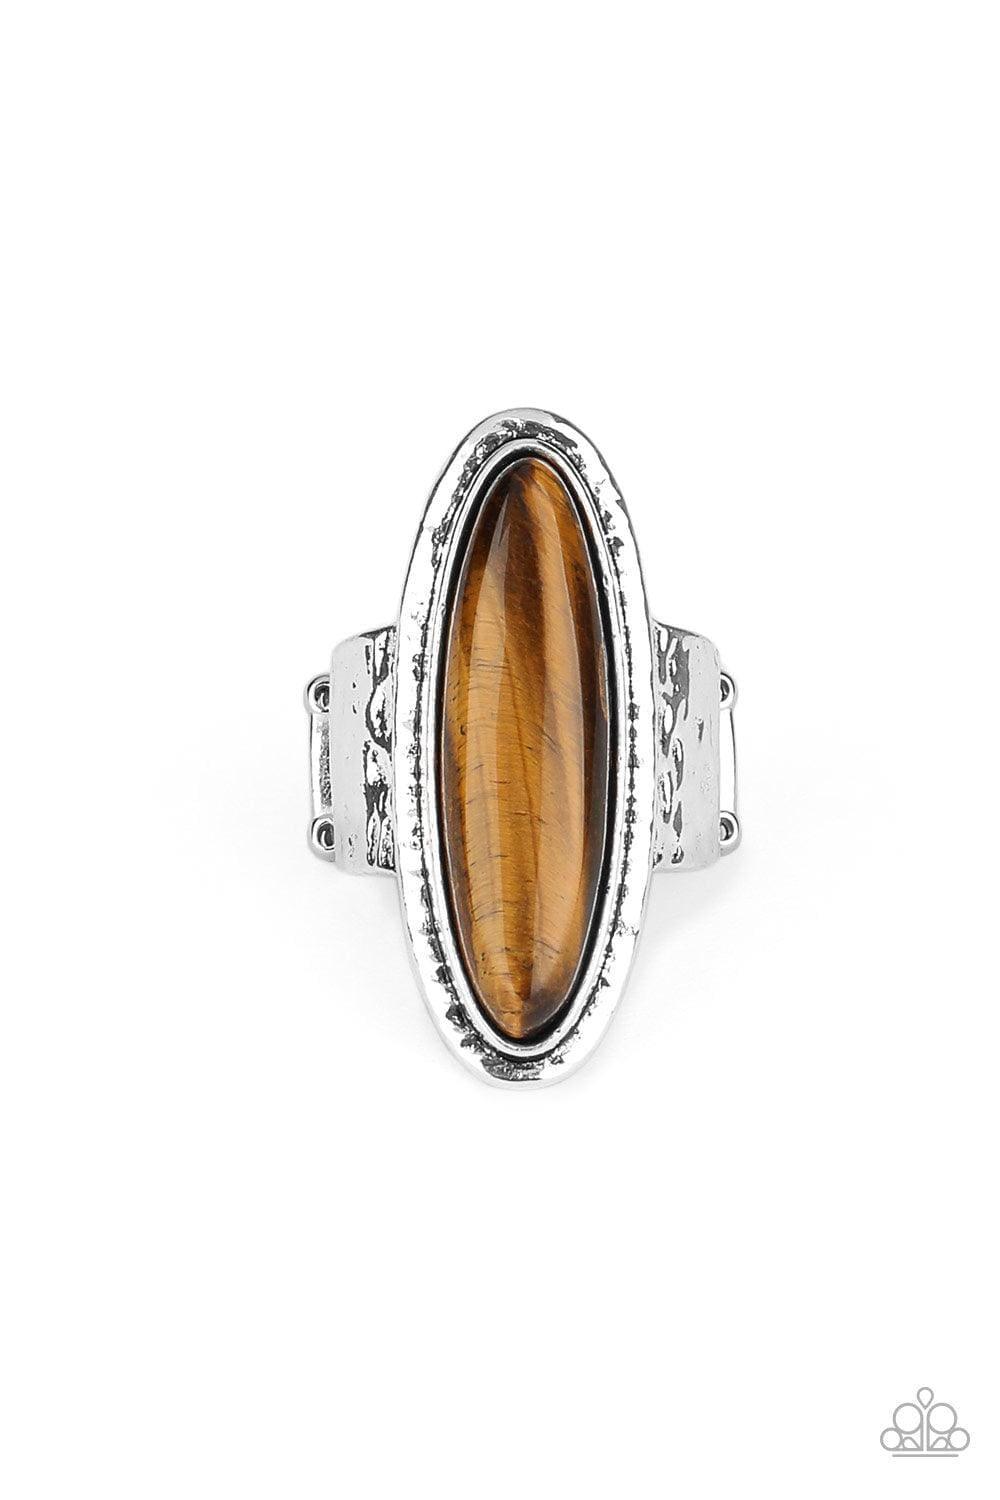 Paparazzi Accessories - Stone Mystic - Brown Ring - Bling by JessieK